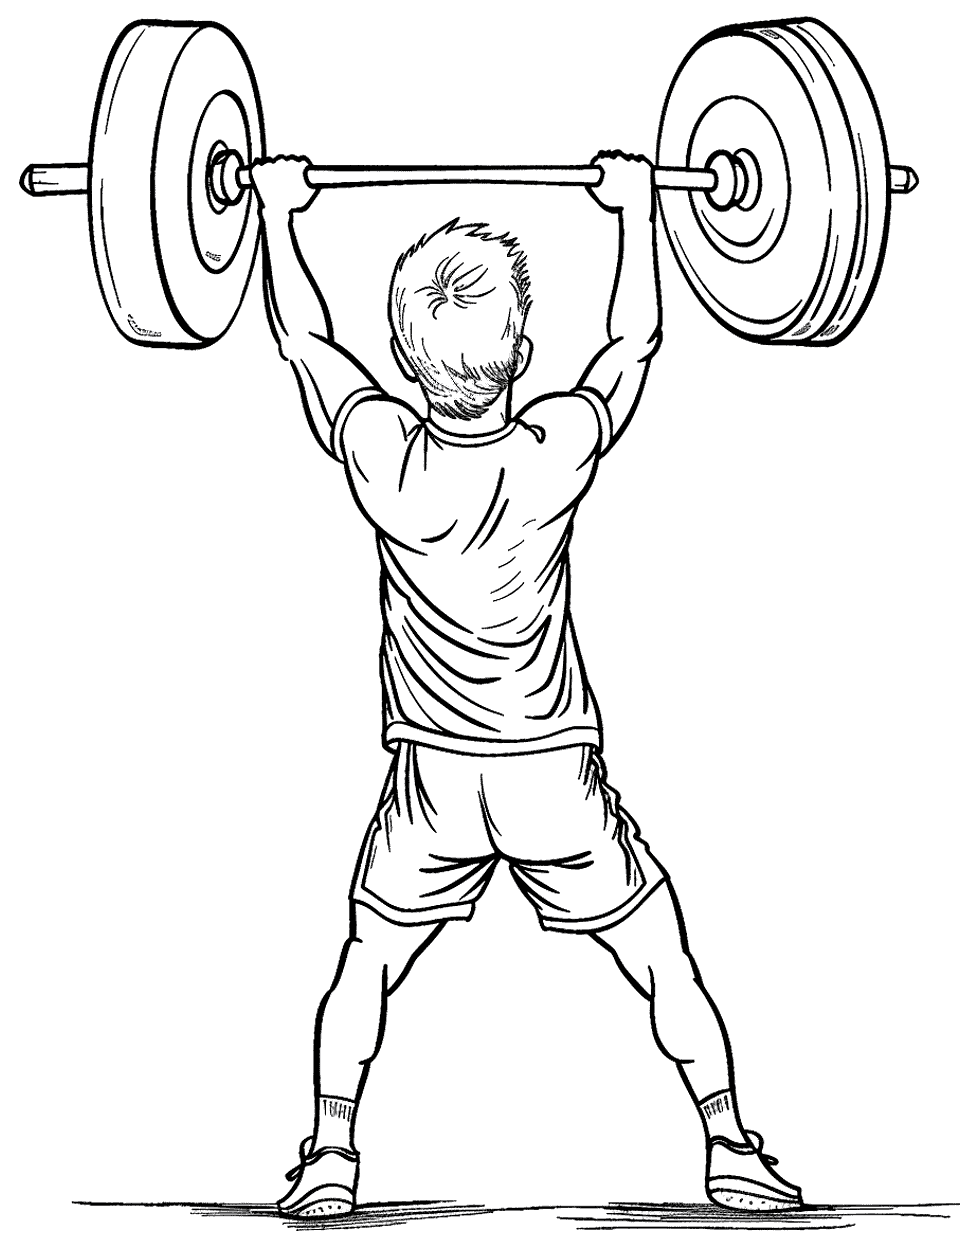 Weightlifting Overhead Lift Sports Coloring Page - An athlete lifting a heavyweight overhead with both arms.